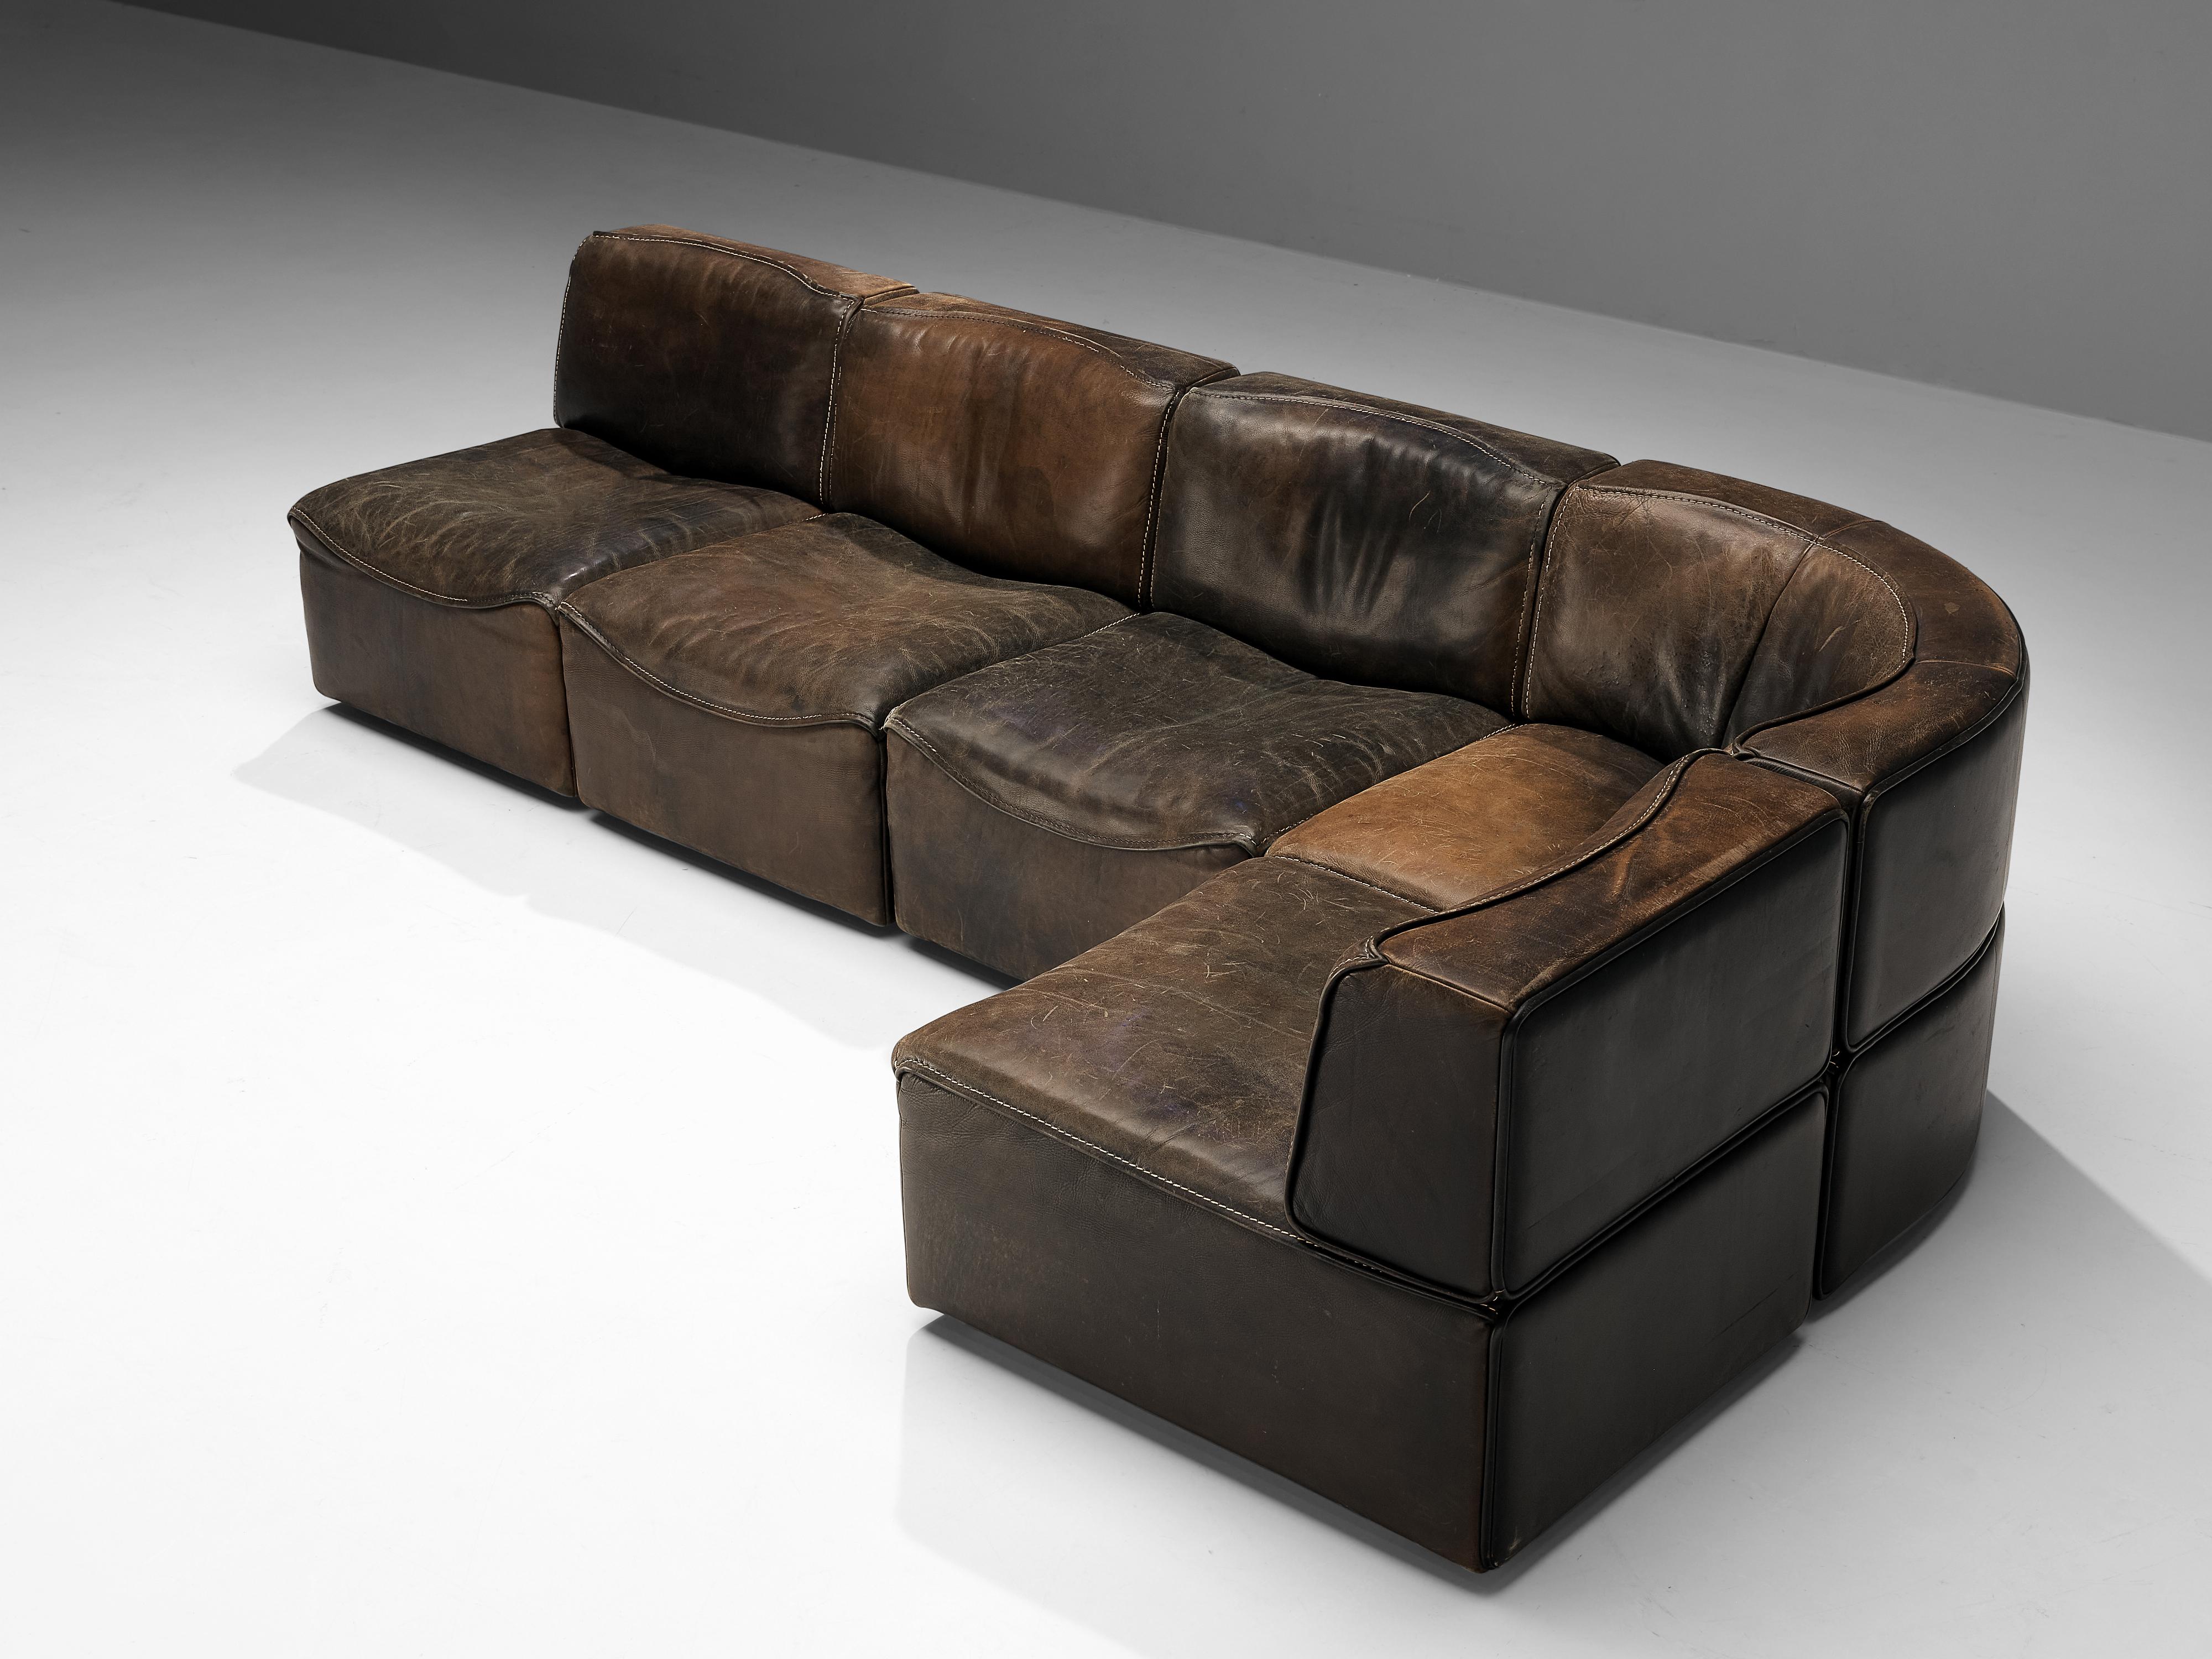 De Sede, sectional sofa model DS-15, leather, Switzerland, 1970s

This high quality sectional sofa contains 3 corner elements and 4 normal elements, which makes it possible to arrange this sofa to your own wishes. The design is simplistic yet